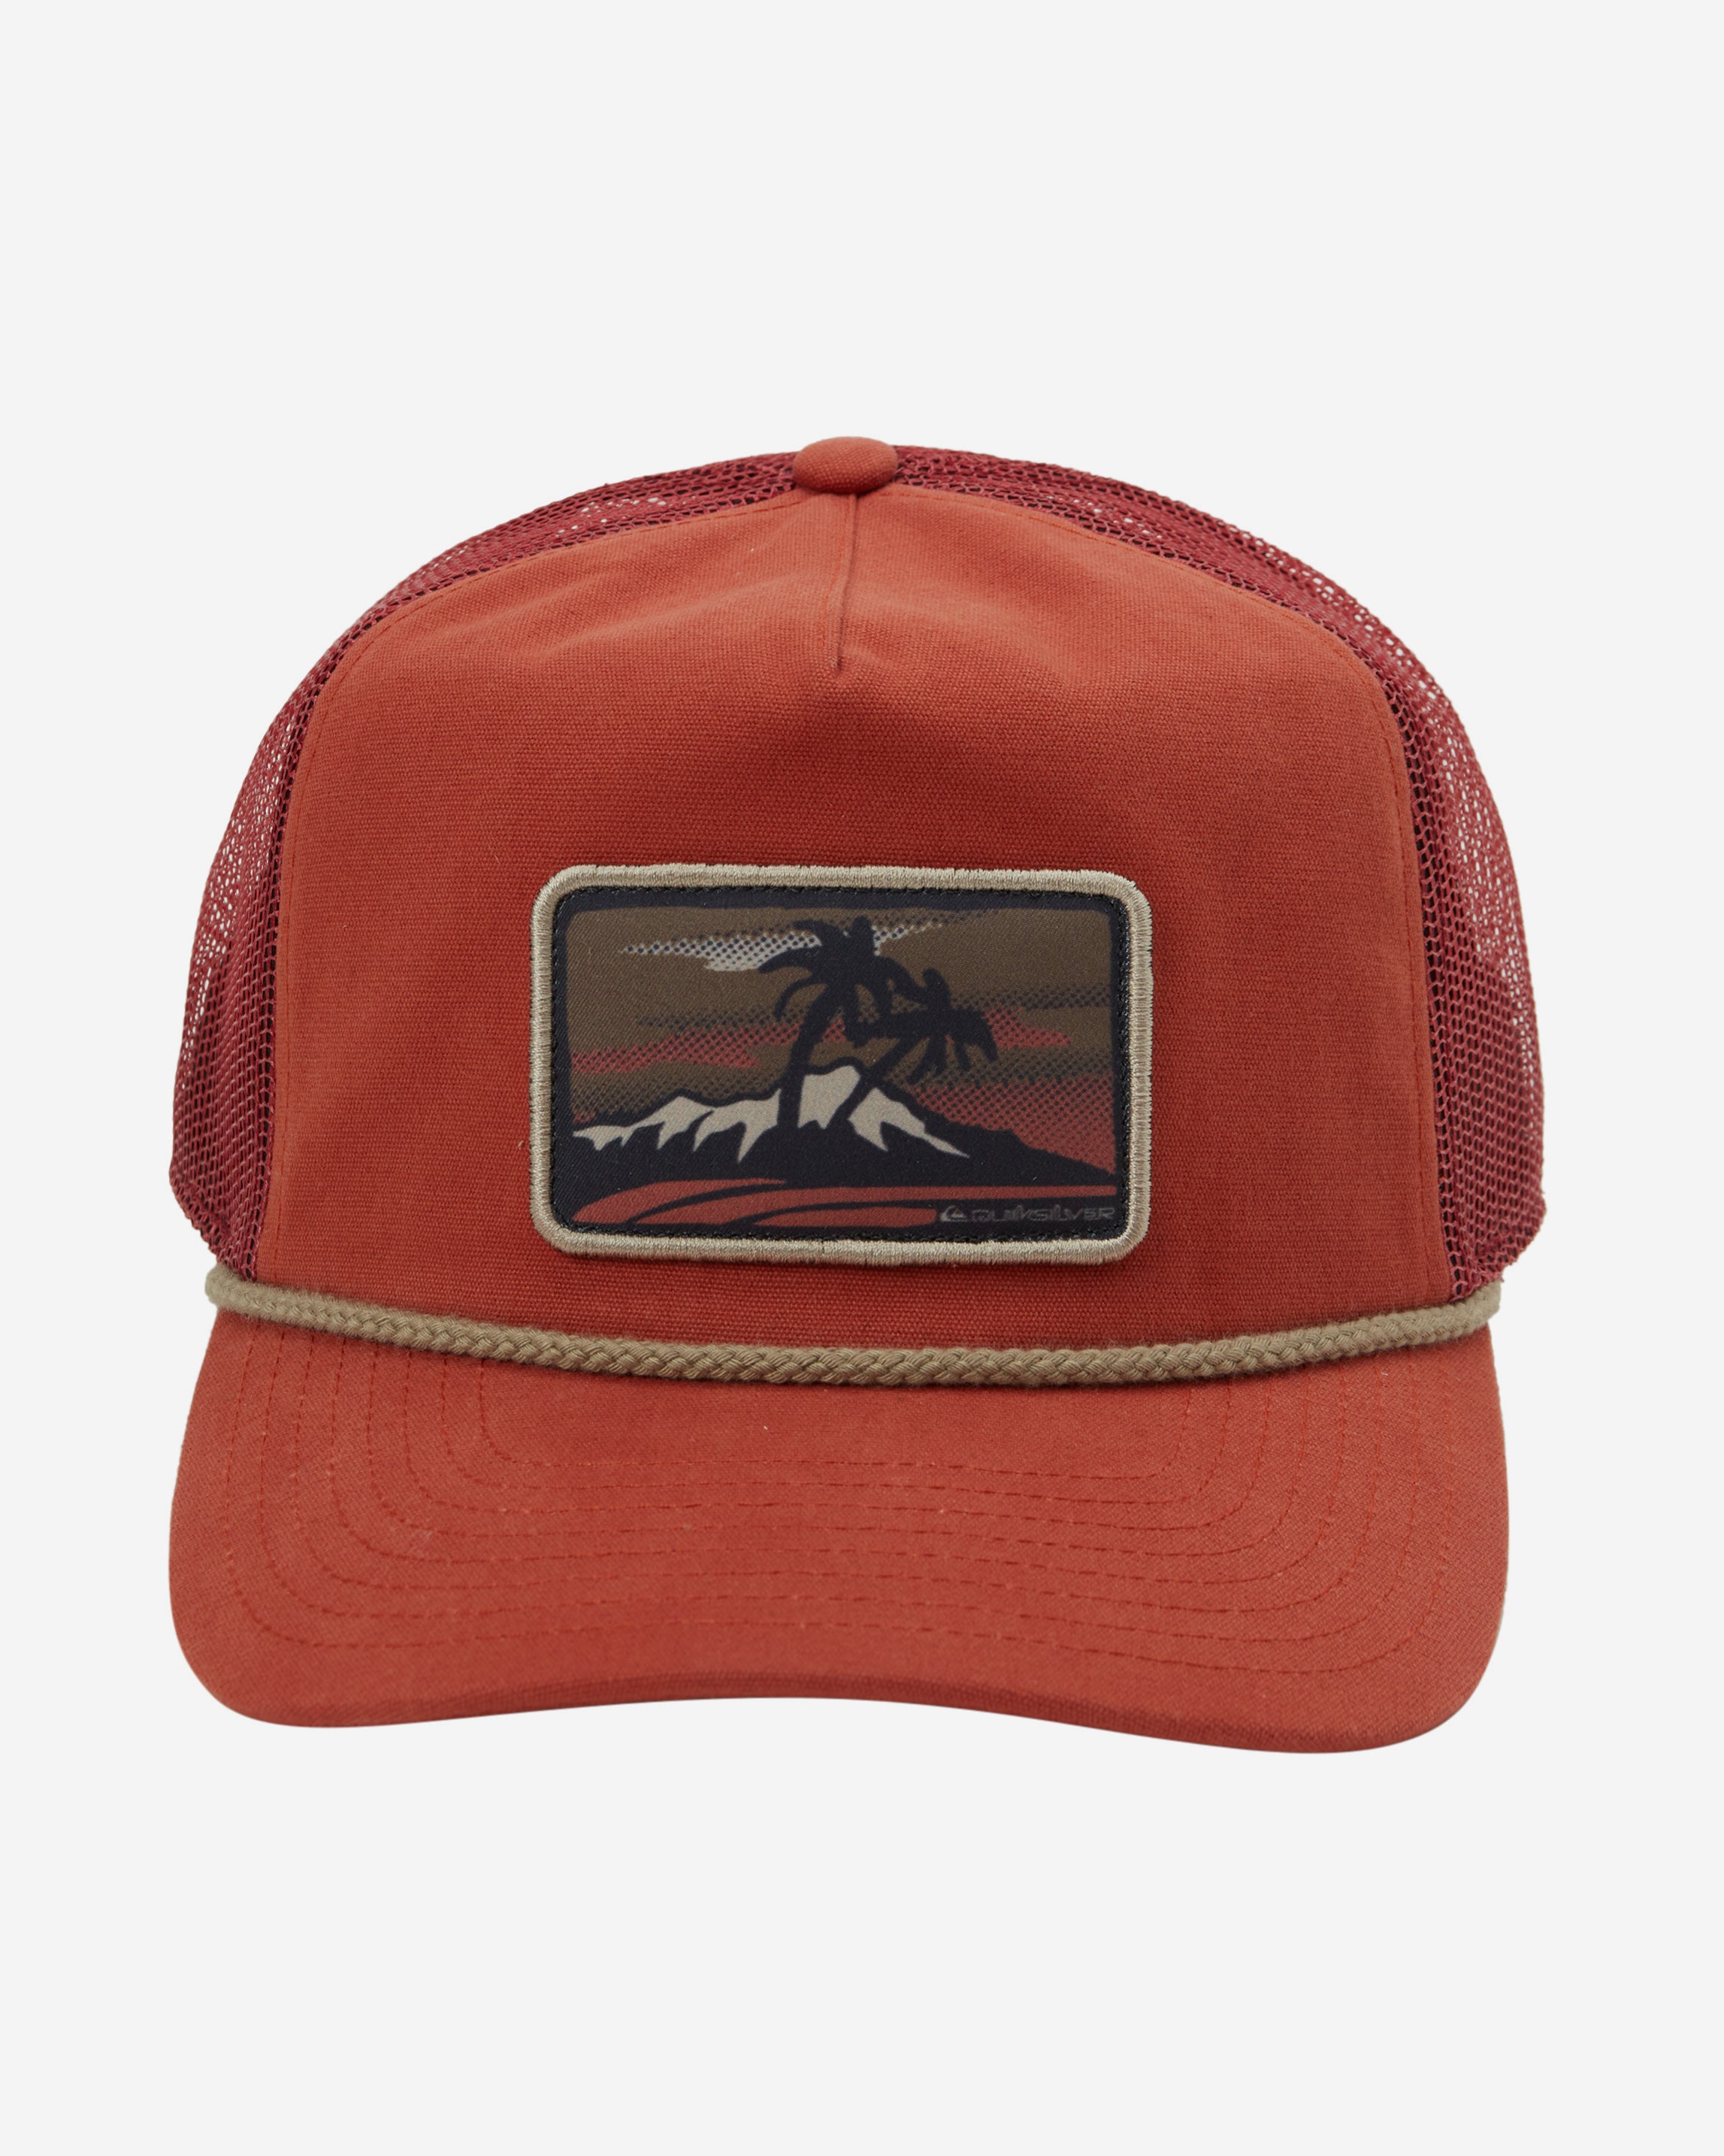 We took your favorite trucker hat on a tropical vacation. The Caster gives you a glimpse into paradise with an art patch and a semi-curved bill.